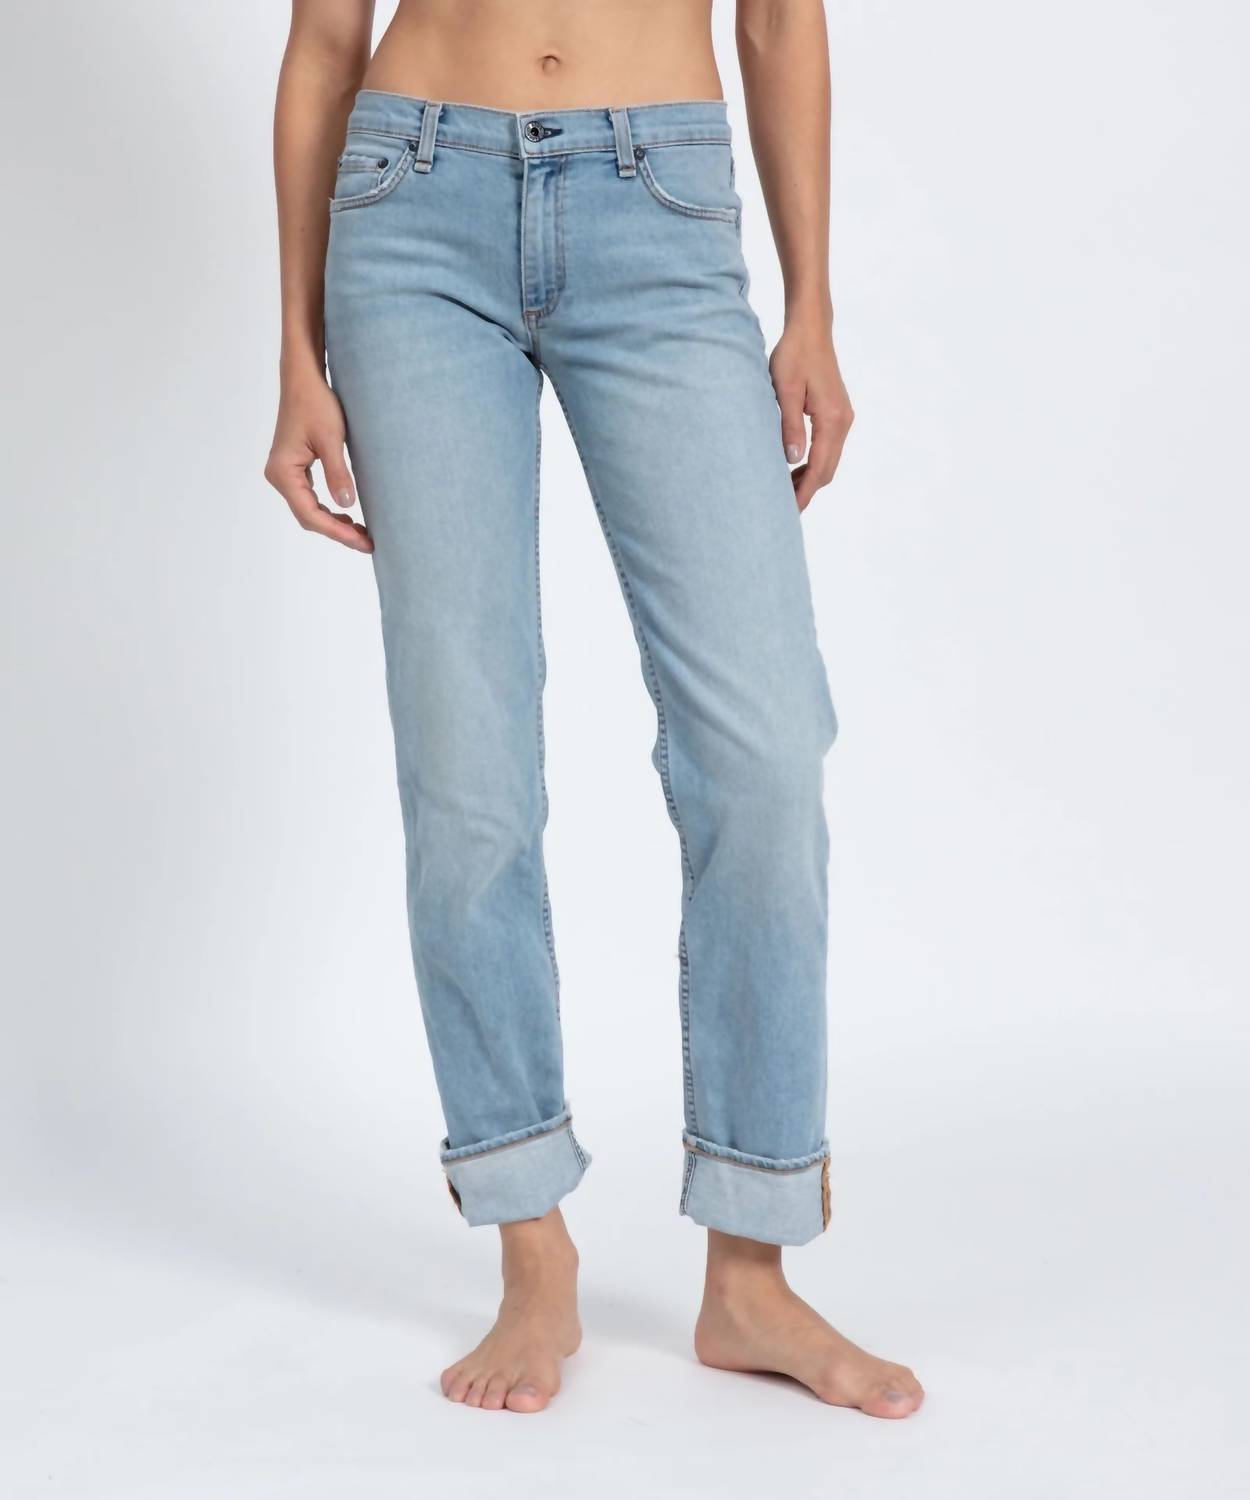 Premium Seriously Stretchy Mid-Rise Skinny Jean